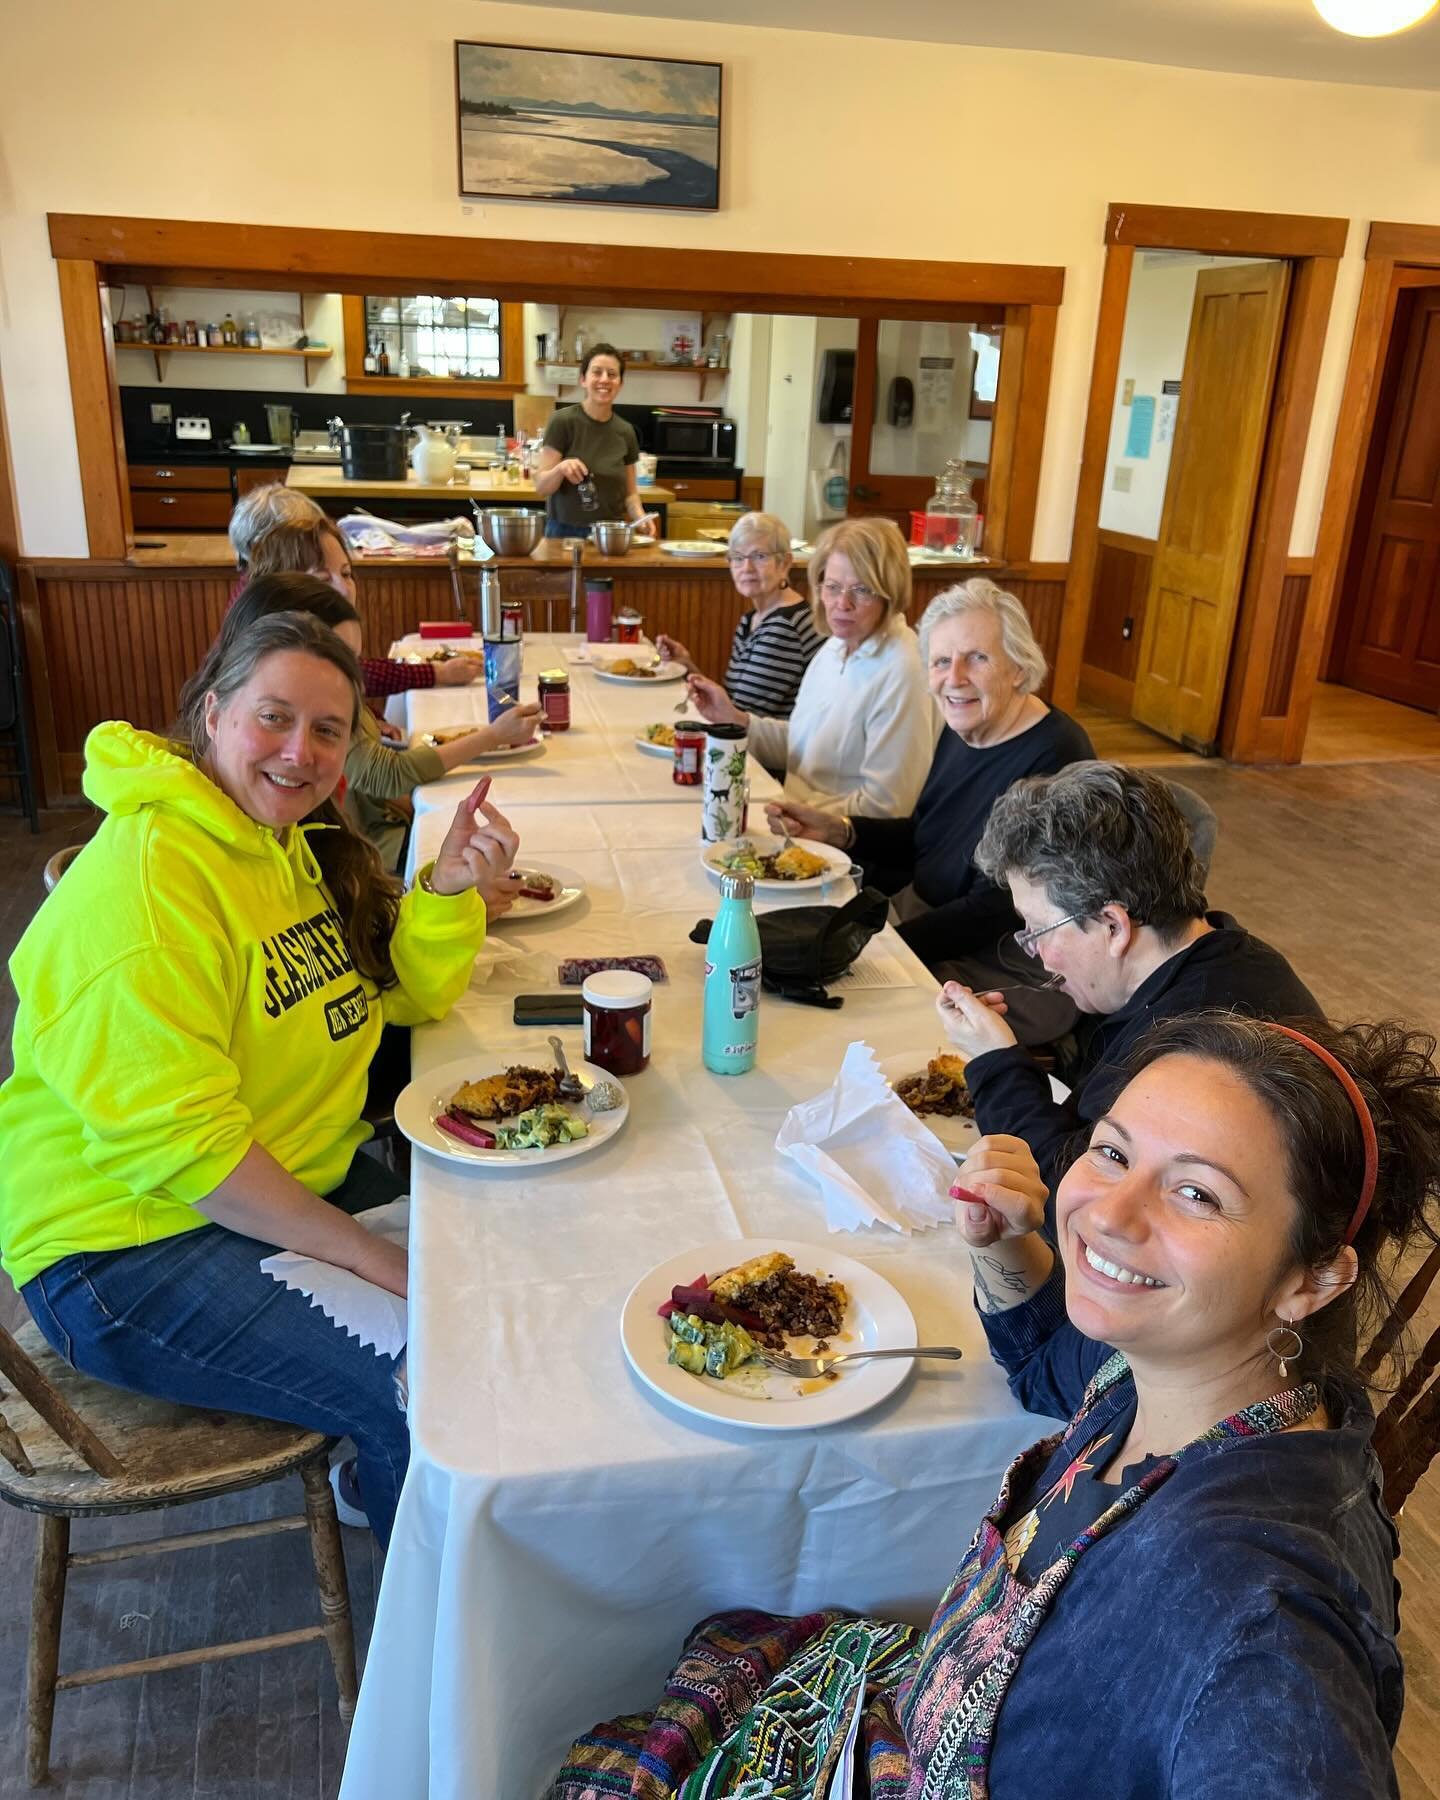 The Morristown Free University&rsquo;s &ldquo;Nutrient Dense Cooking&rdquo; class made such a delicious feast of tamale pie with locally raised beef &amp; pork, cucumber/avocado/cilantro/yougurt salad, picked veggies, blueberry smoothies and honey/se